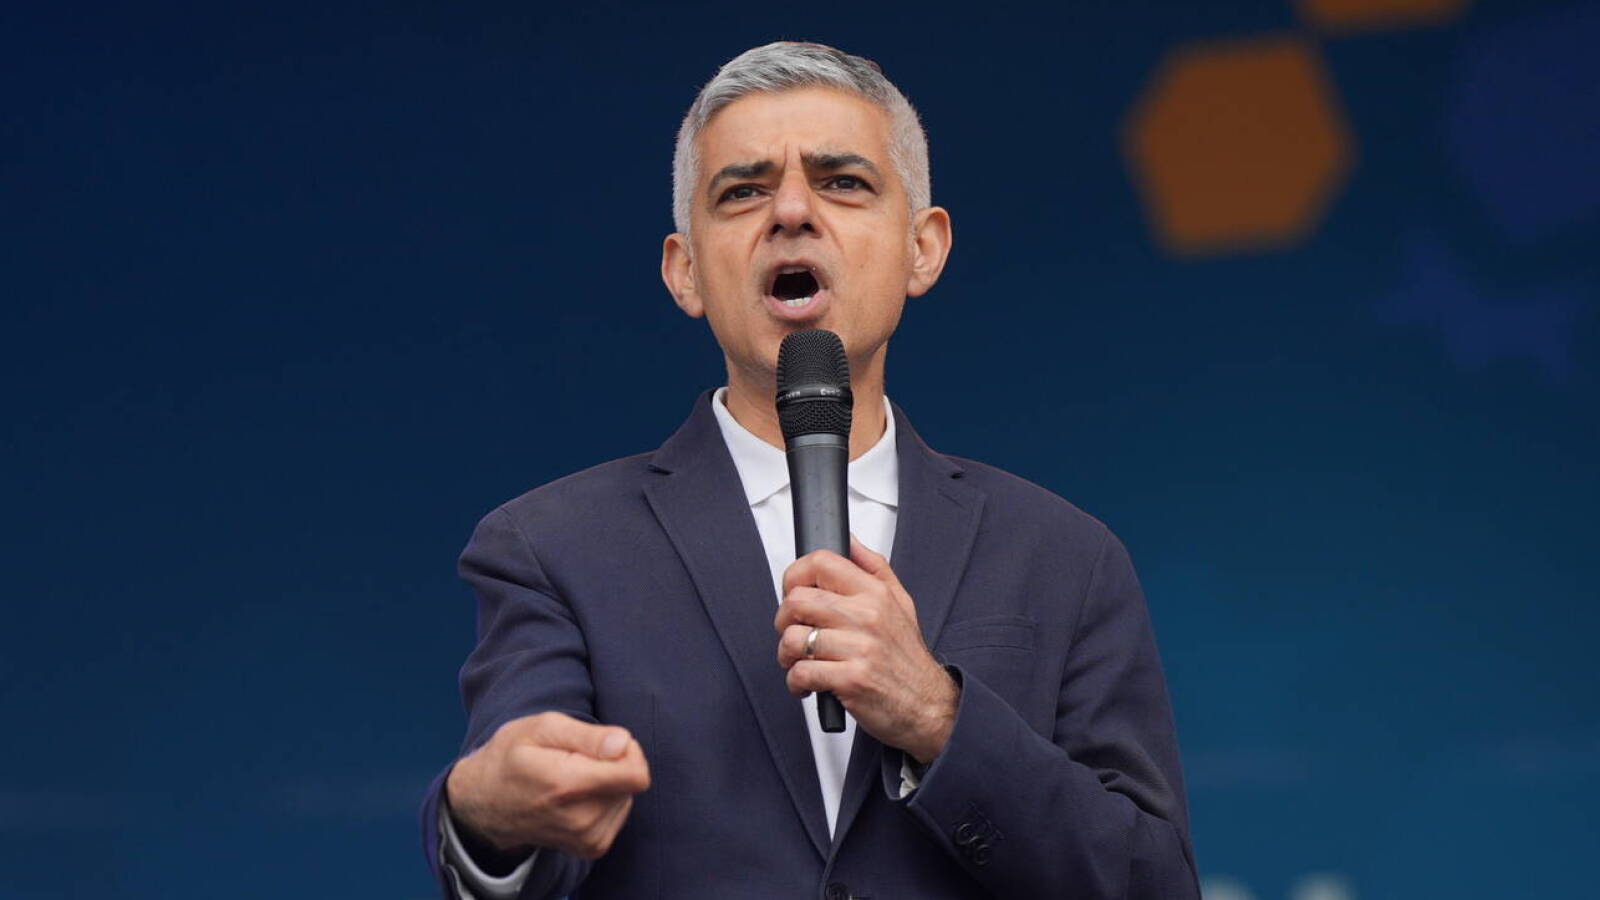 London mayor eyeing Super Bowl bid, other hosting opportunities for major sporting events if re-elected